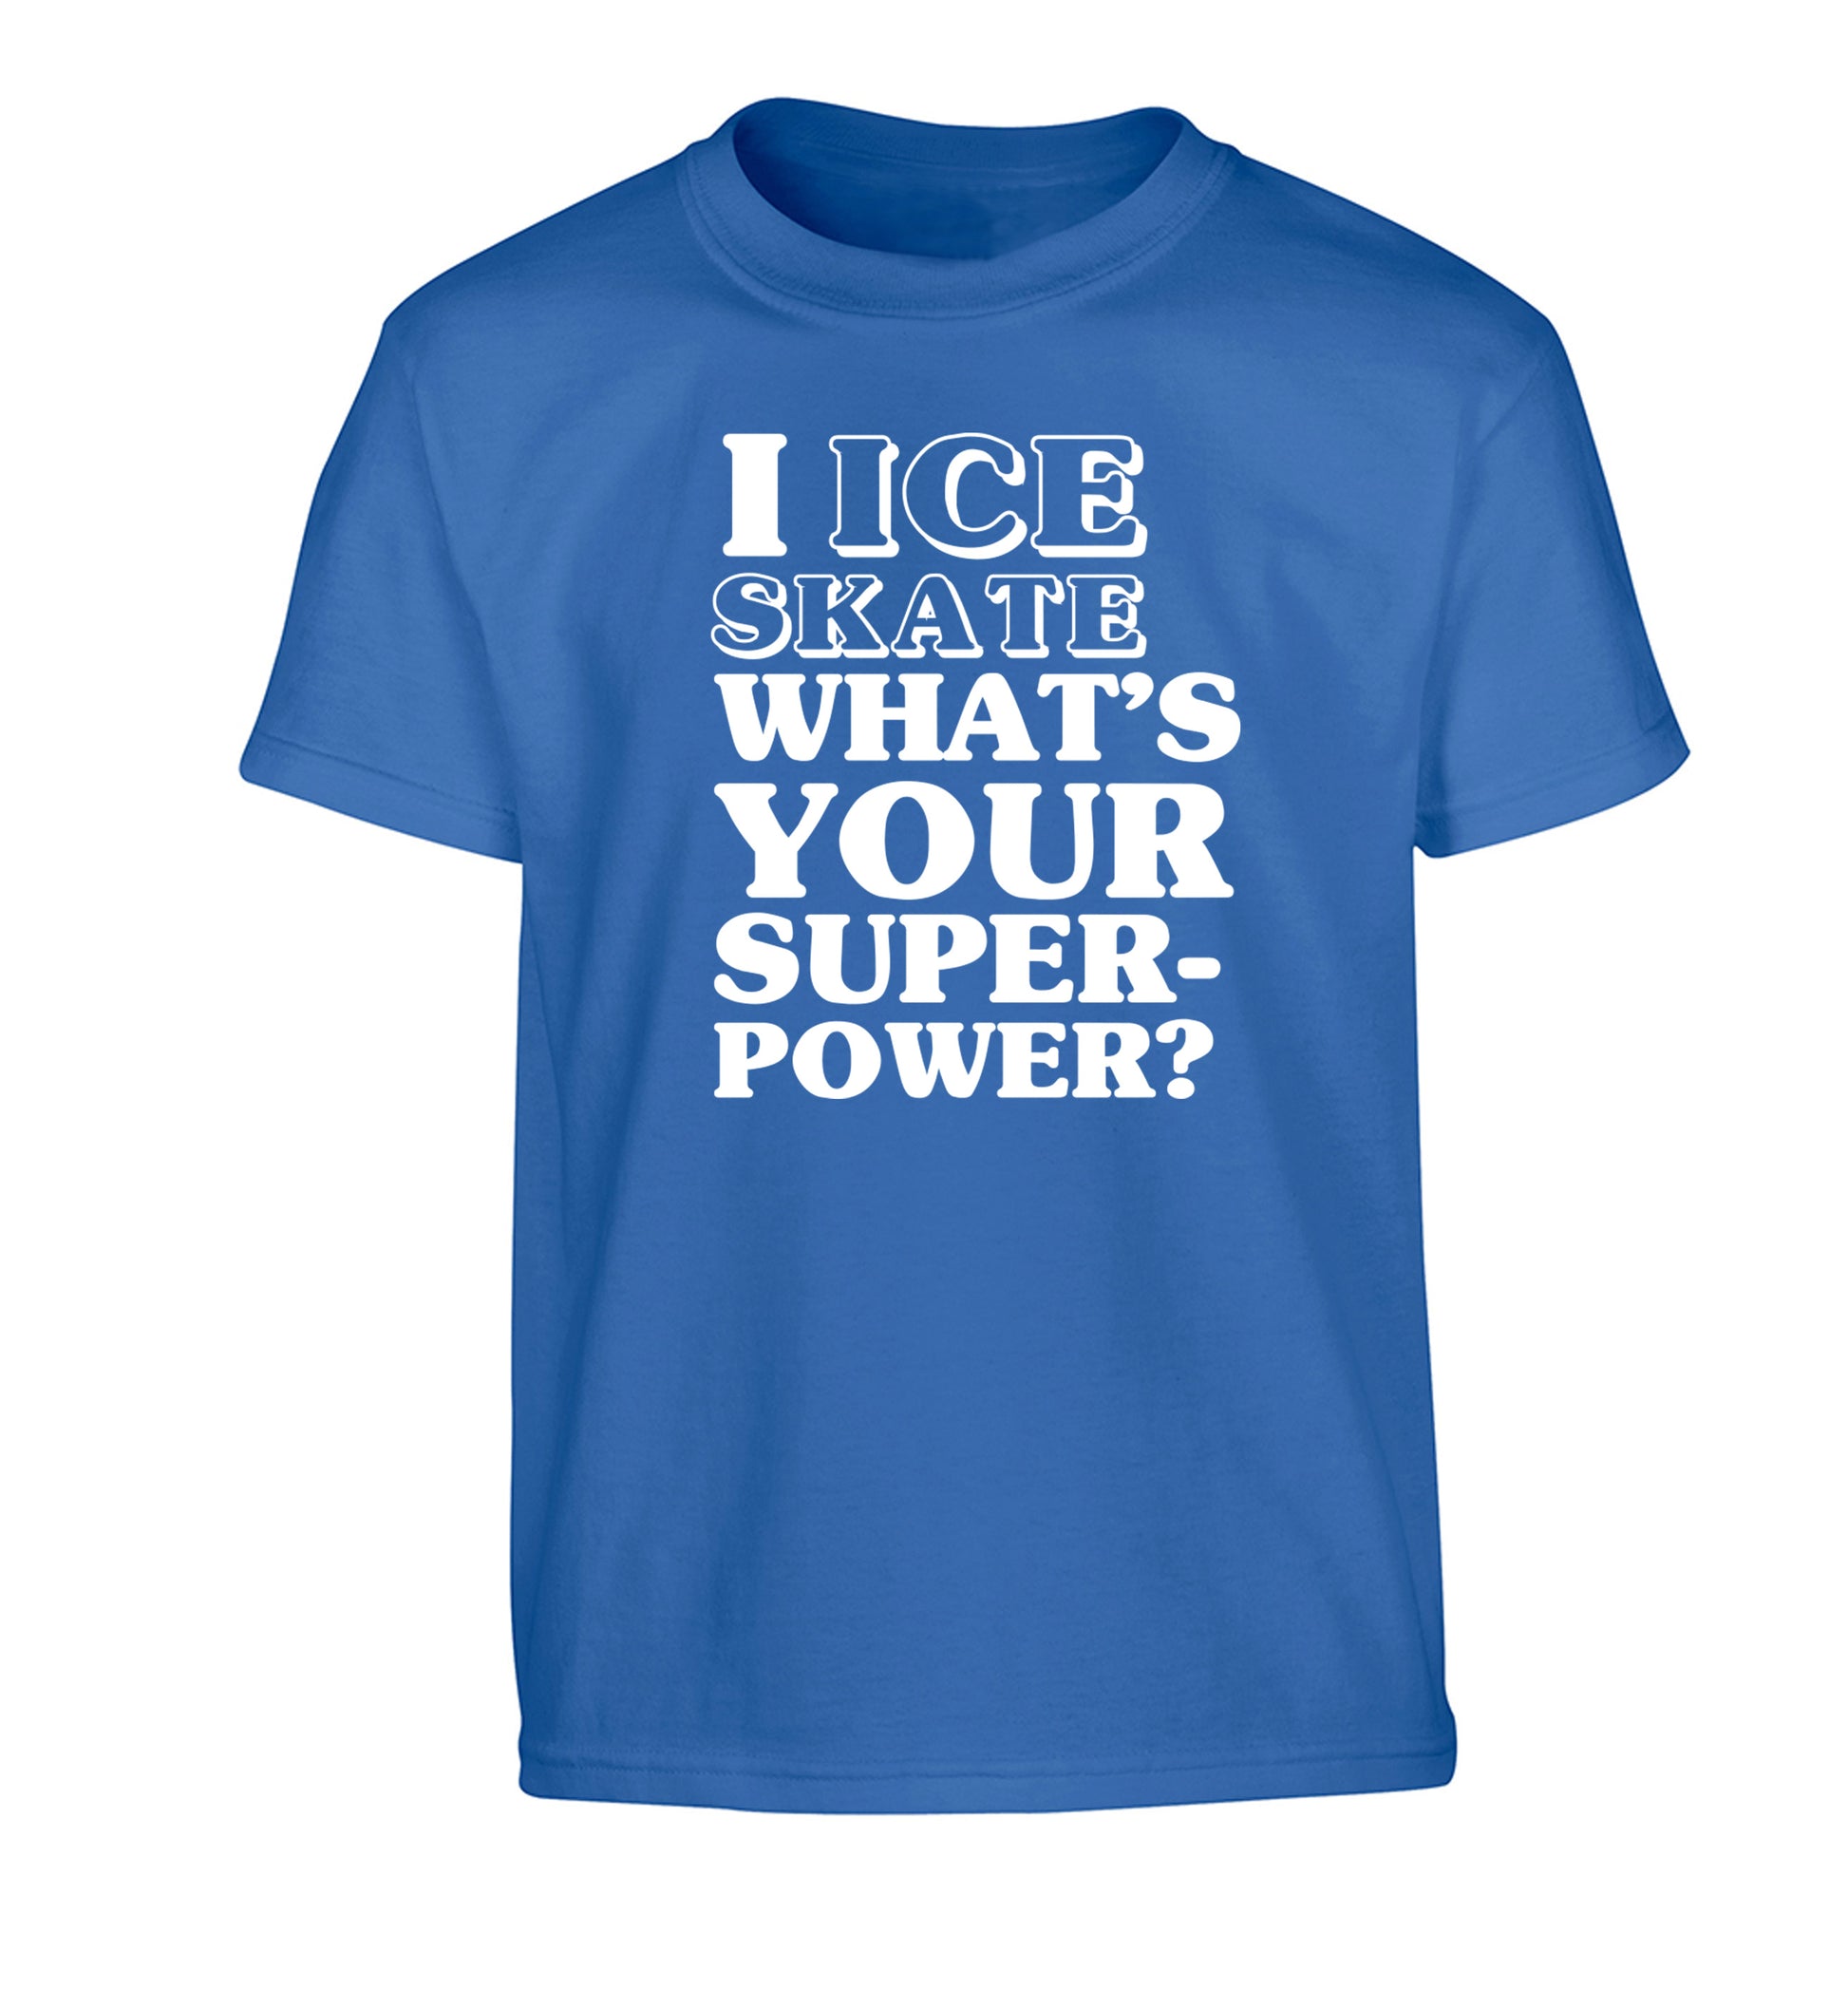 I ice skate what's your superpower? Children's blue Tshirt 12-14 Years